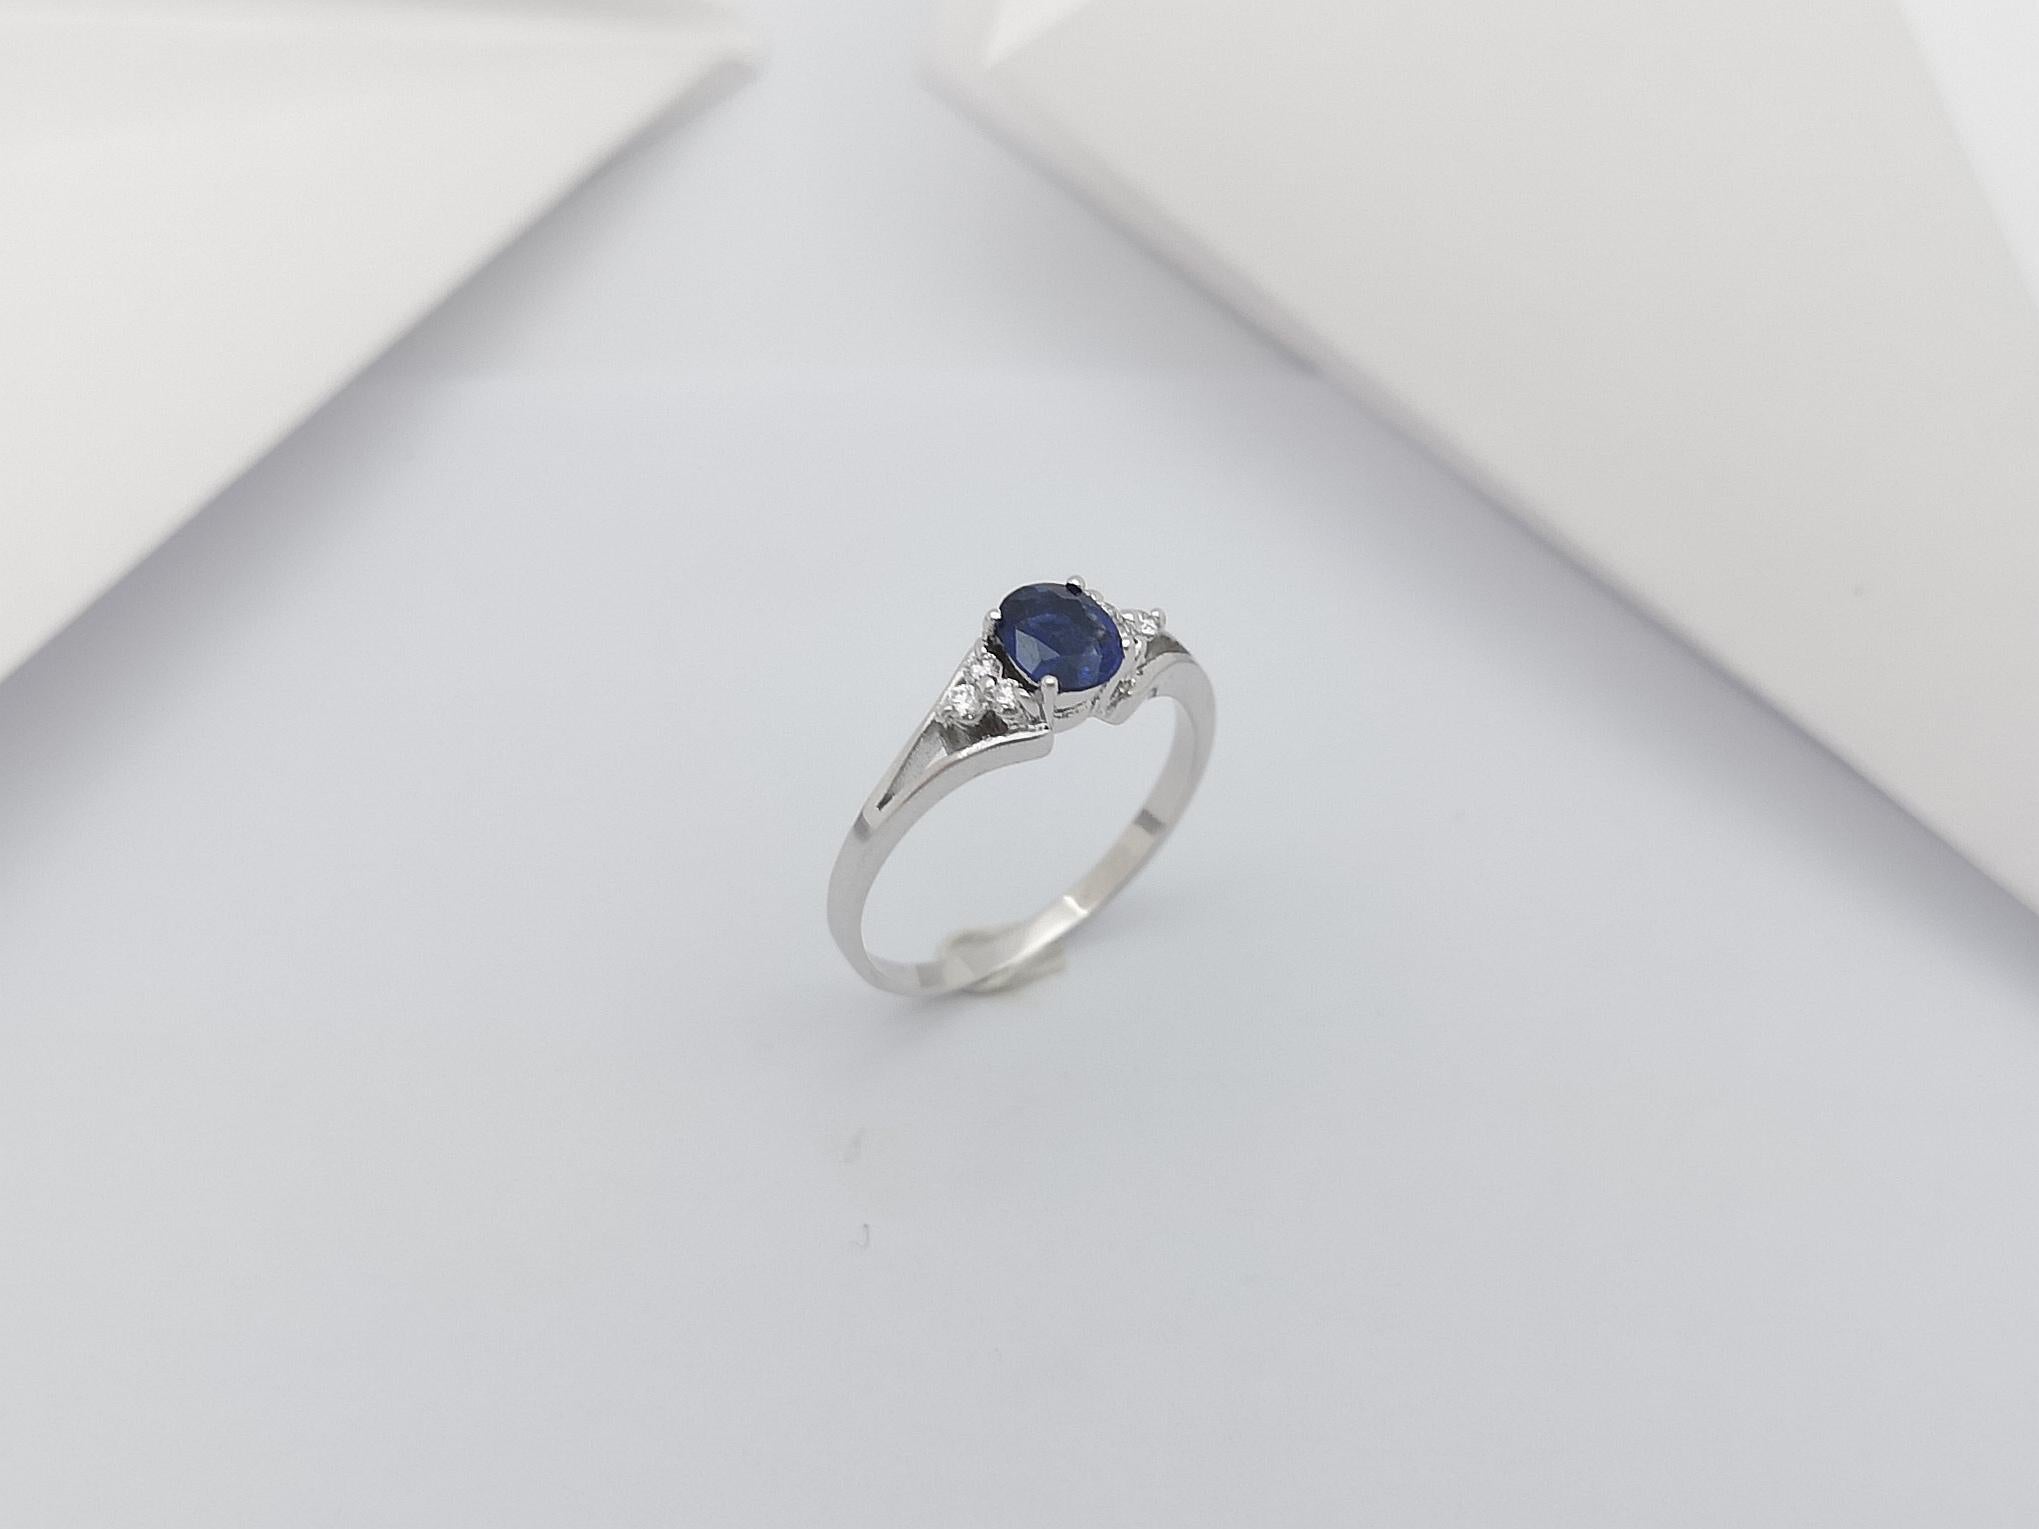 Blue Sapphire with Diamond Ring Set in 18 Karat White Gold Settings For Sale 7